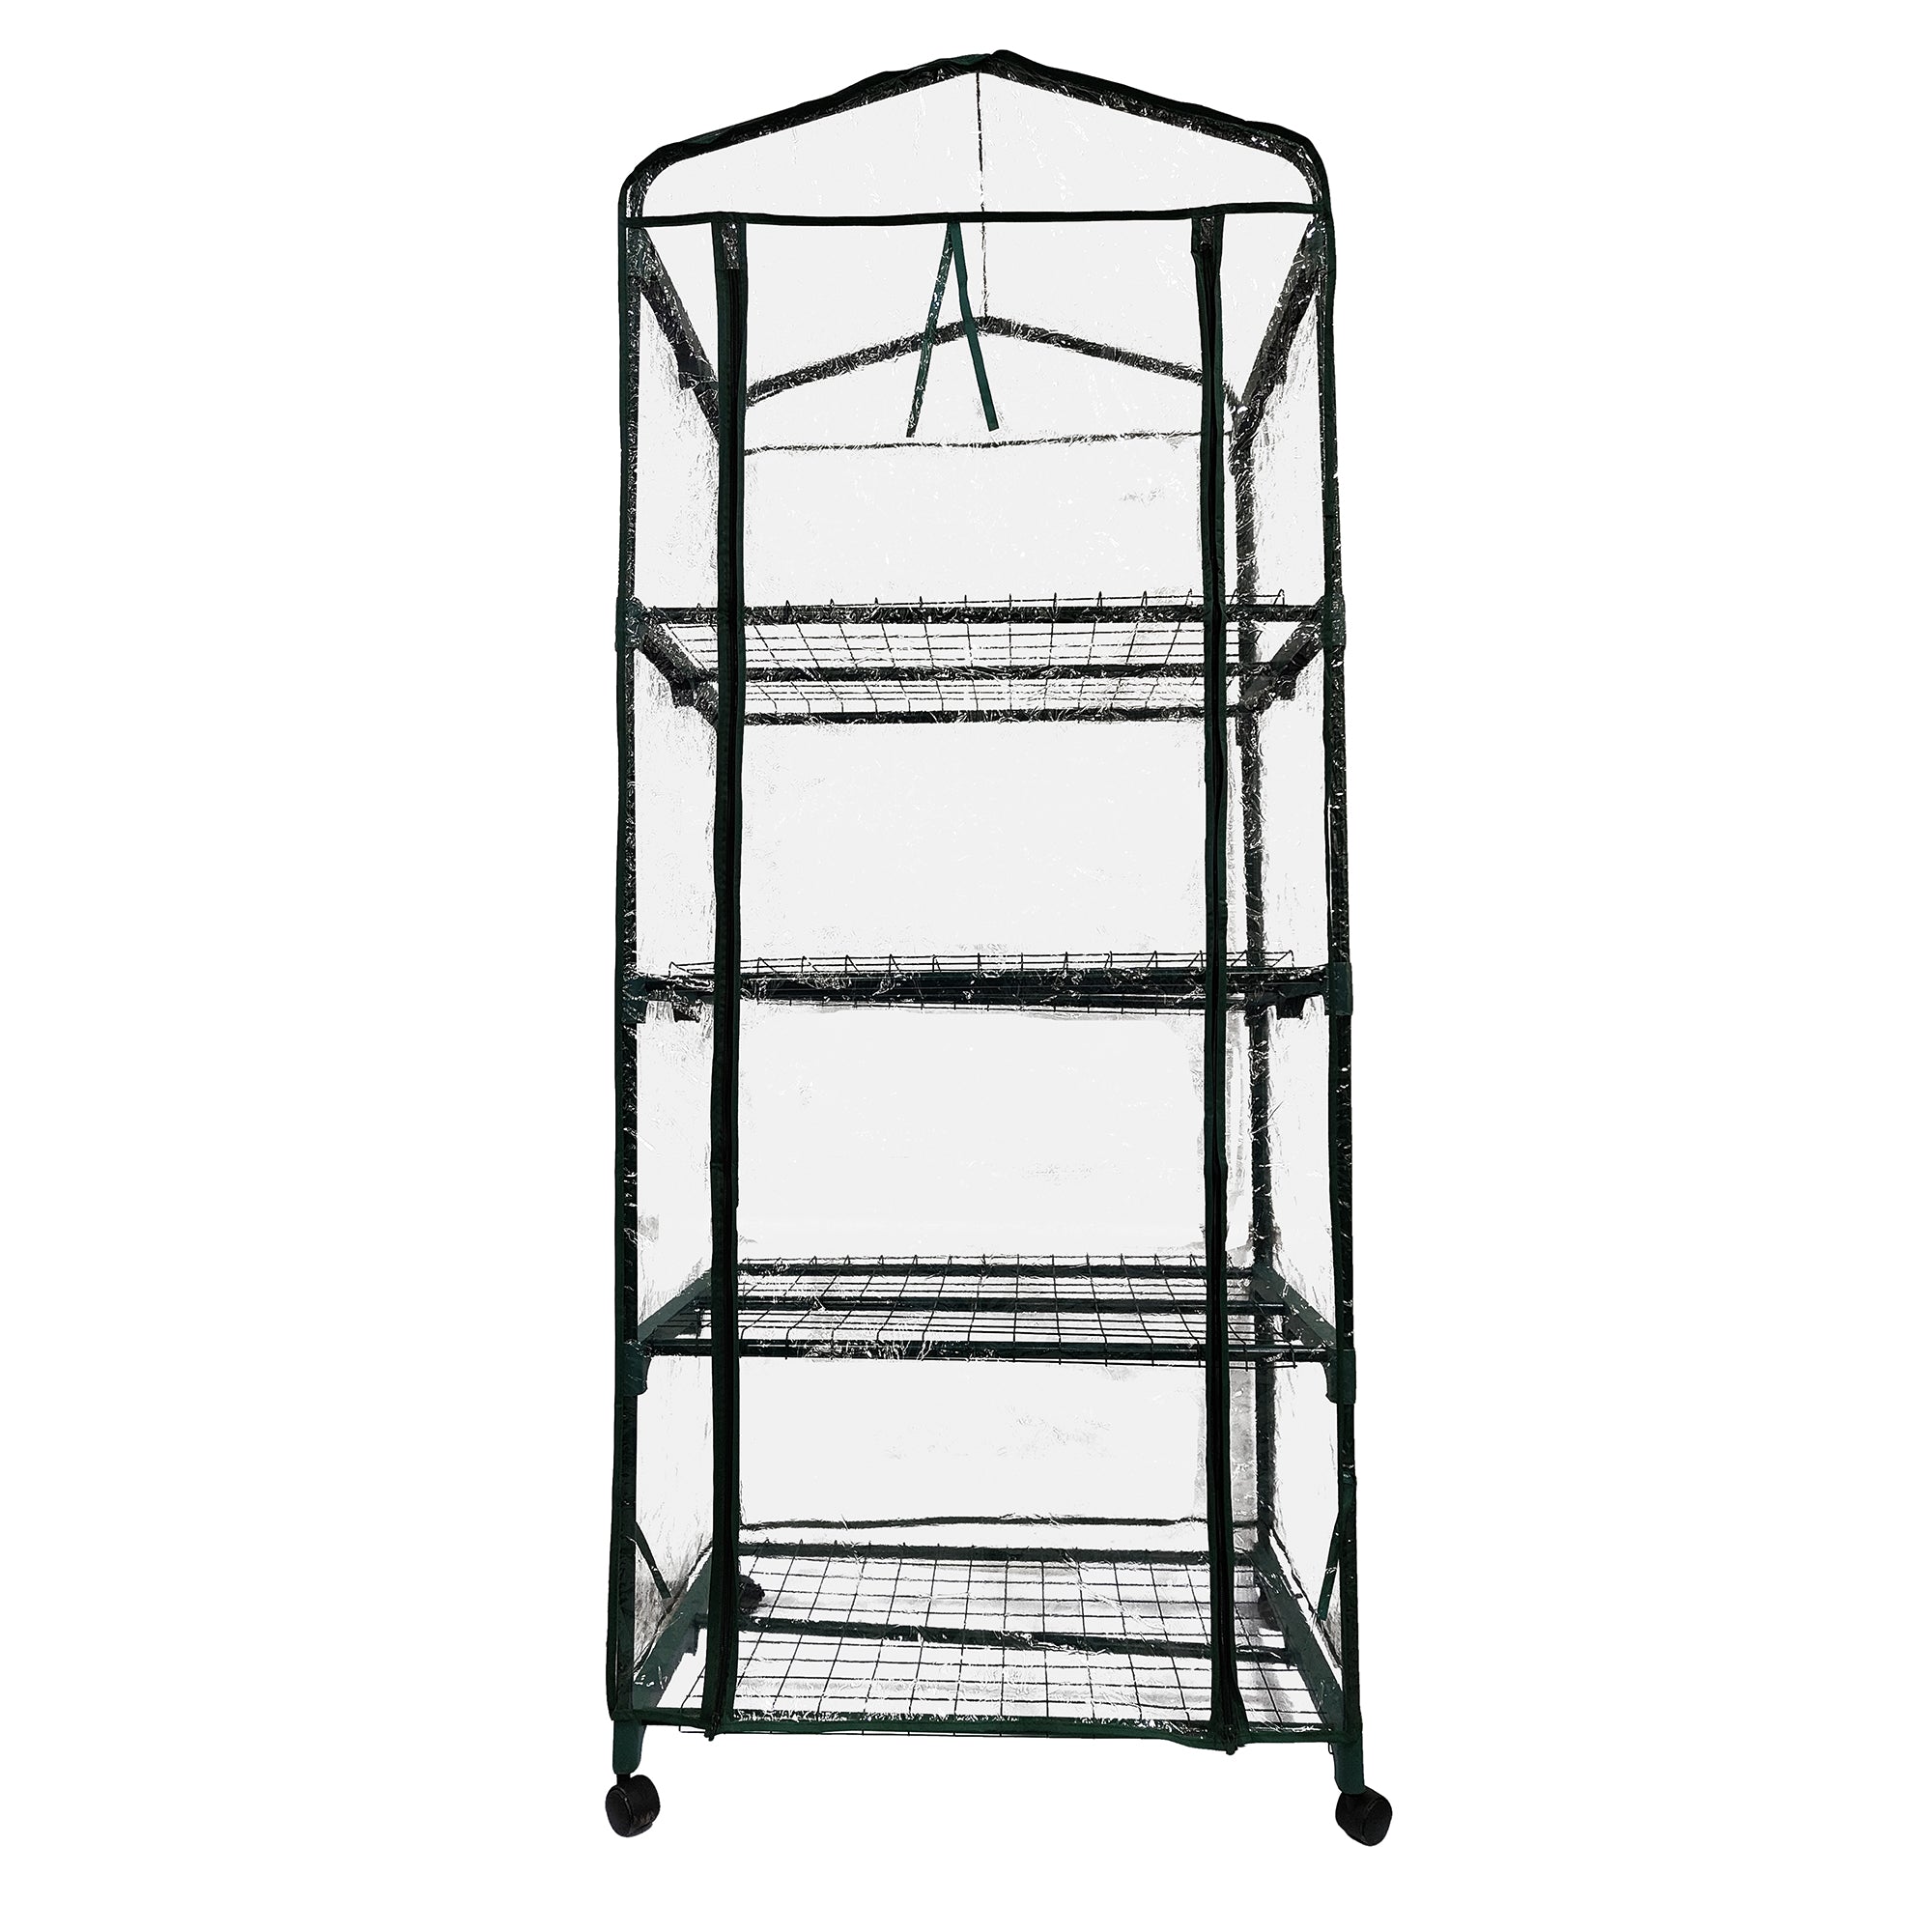 ZNTS Mini Greenhouse - 4 Tiers Indoor Outdoor Greenhouse With wheels-Use in Any Season for Plants 05047247